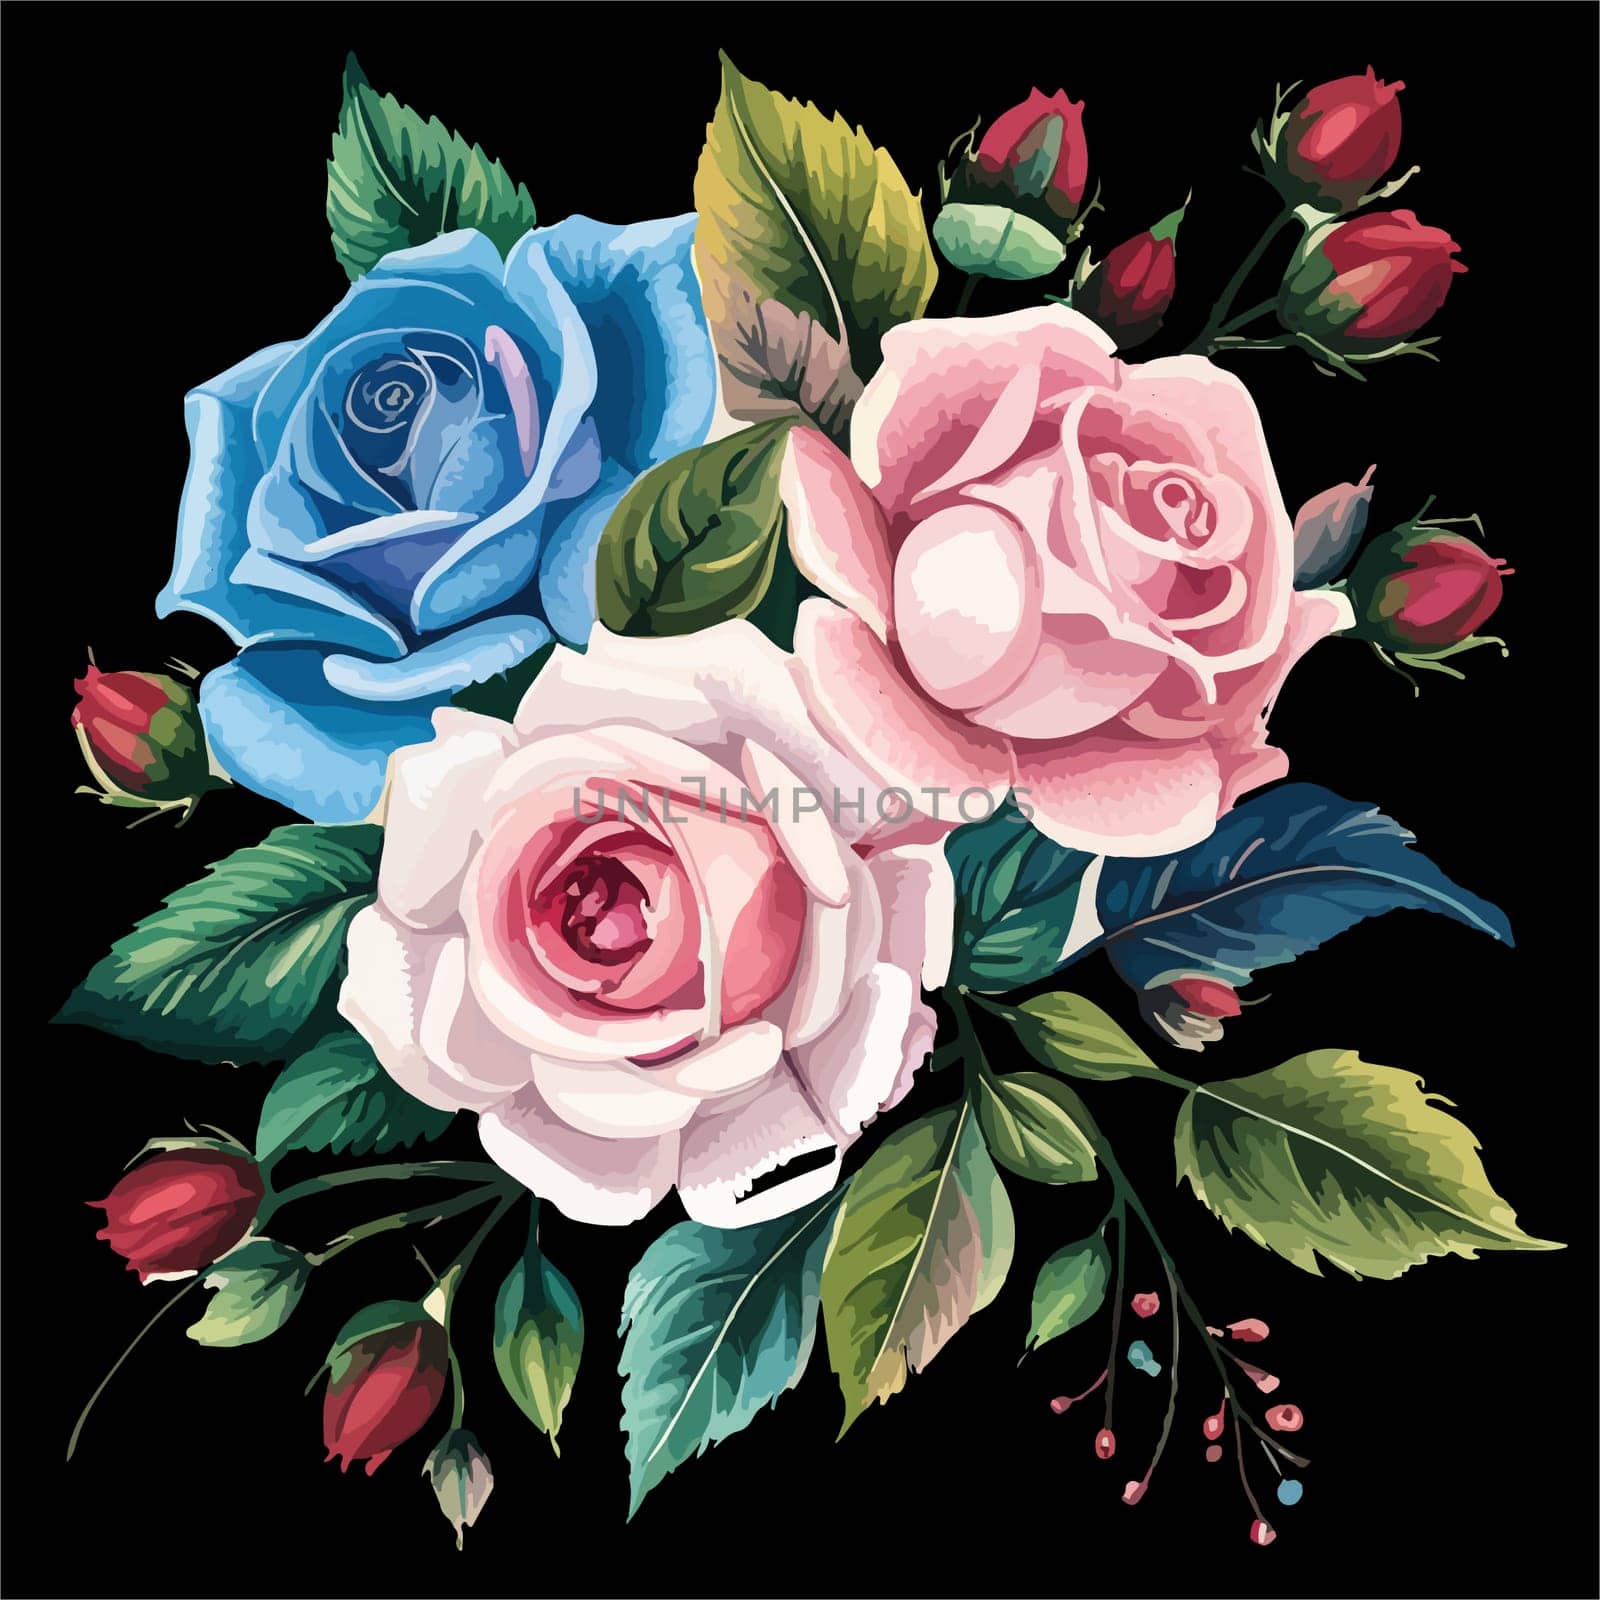 Vintage card with roses red blue and pink on a white background. Can be used as invitation card for wedding, birth, other invents, as print on clothes. illustration